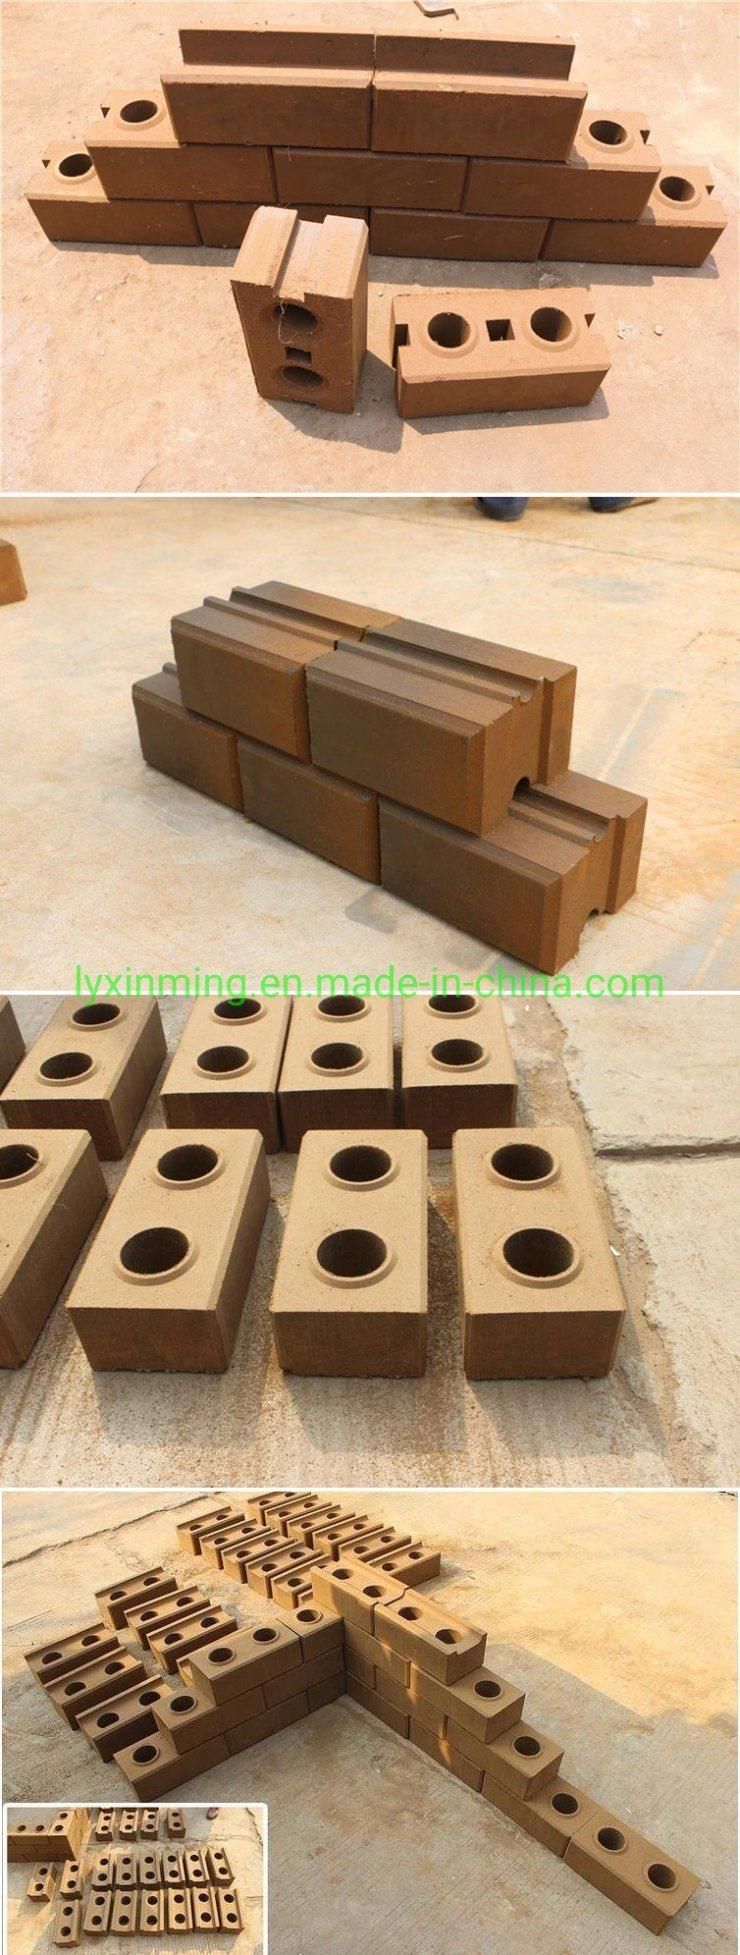 Wide Used Xm2-40 Block Making Machine Clay Brick Machine for Building House